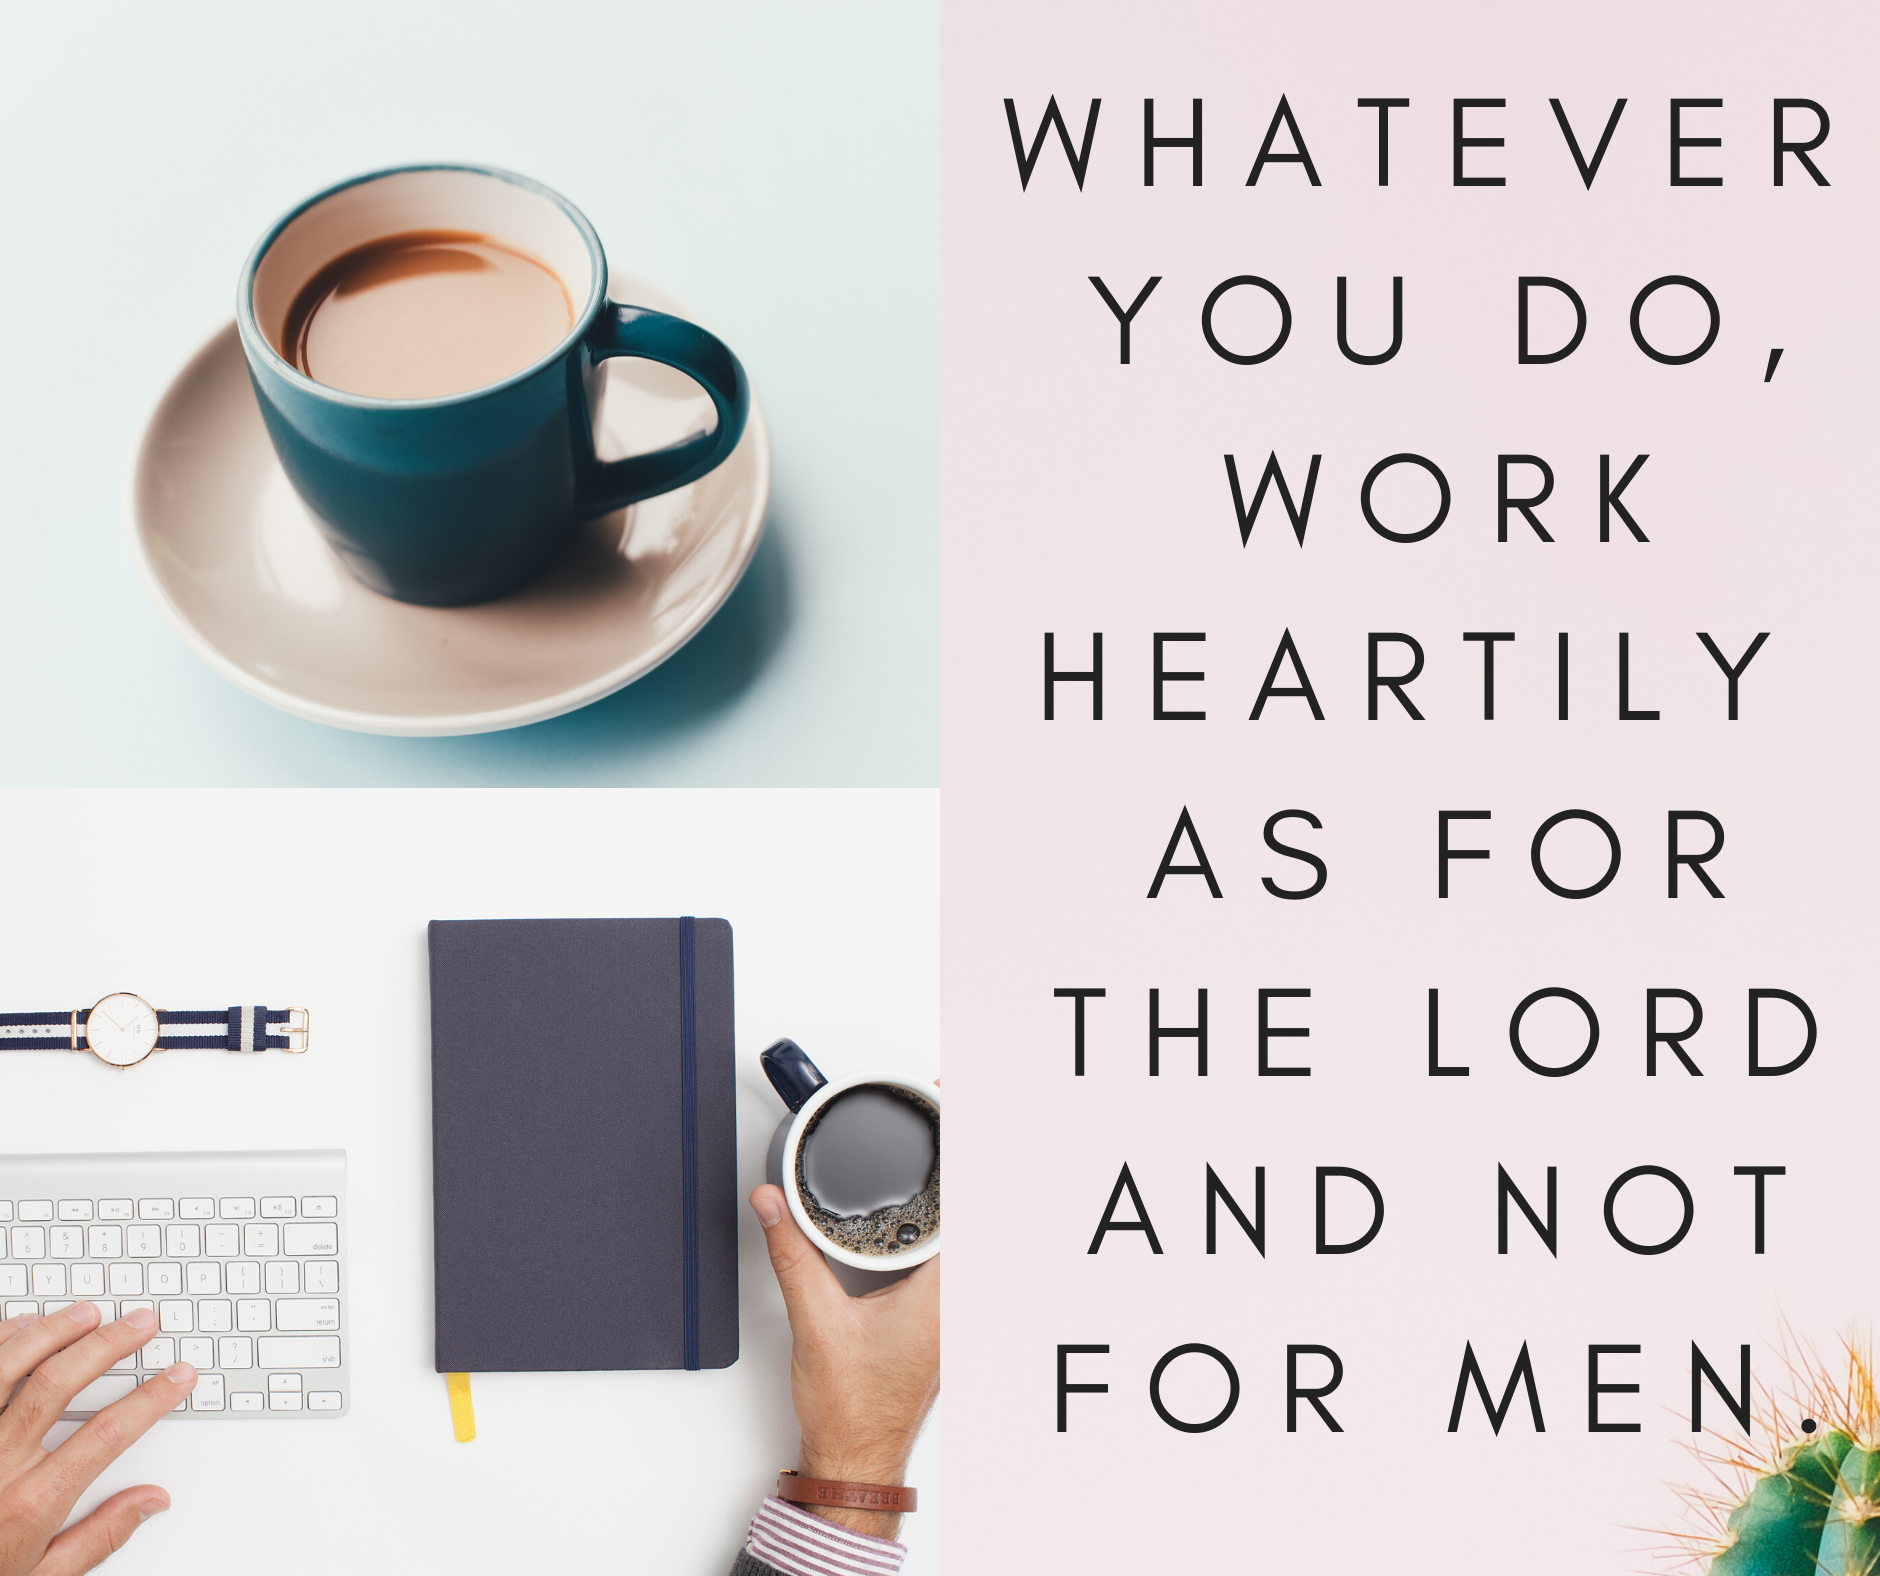 Work heartily as for the Lord